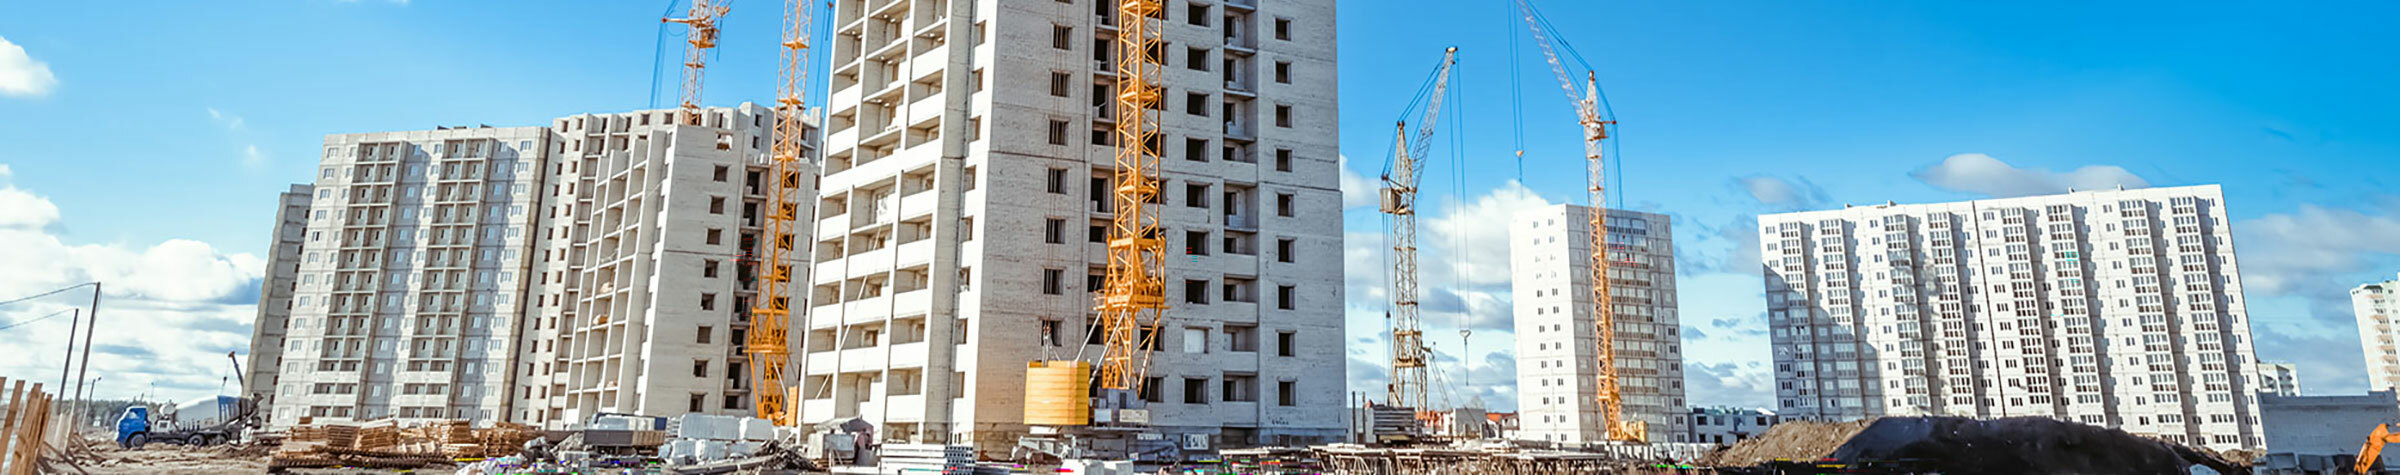 Several concrete high rise buildings on a construction site with yellow cranes